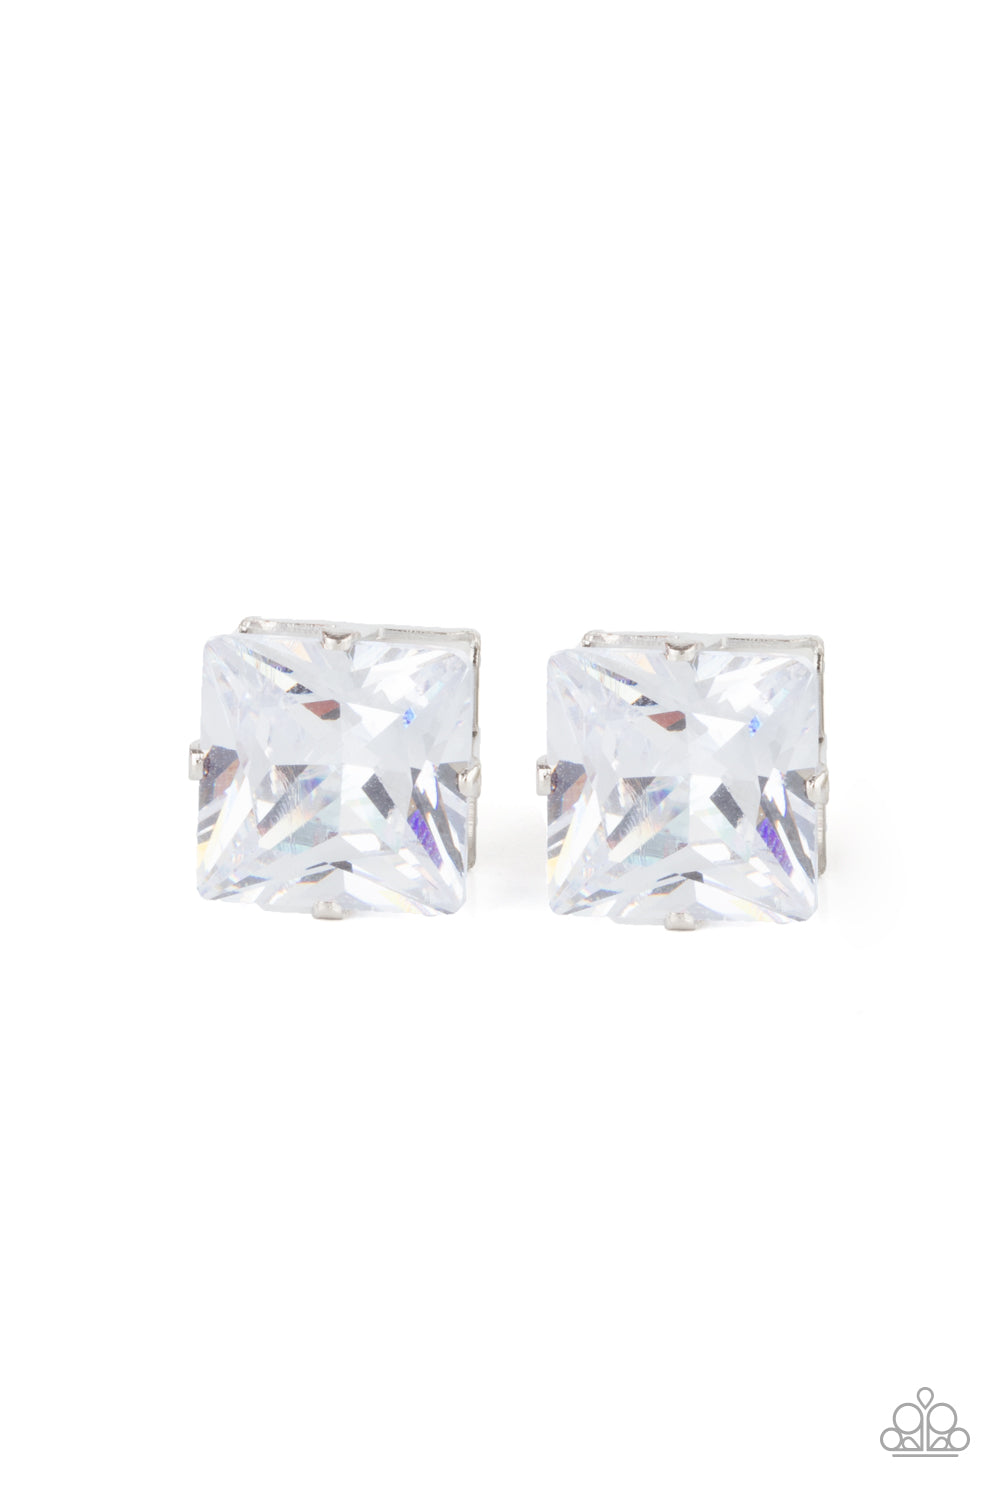 Times Square Timeless - White - Paparazzi- A stunning oversized square rhinestone, set in a classic silver pronged fitting, makes a show-stopping impact as it shines brilliantly and draws attention up to the face. Earring attaches to a standard post fitting.